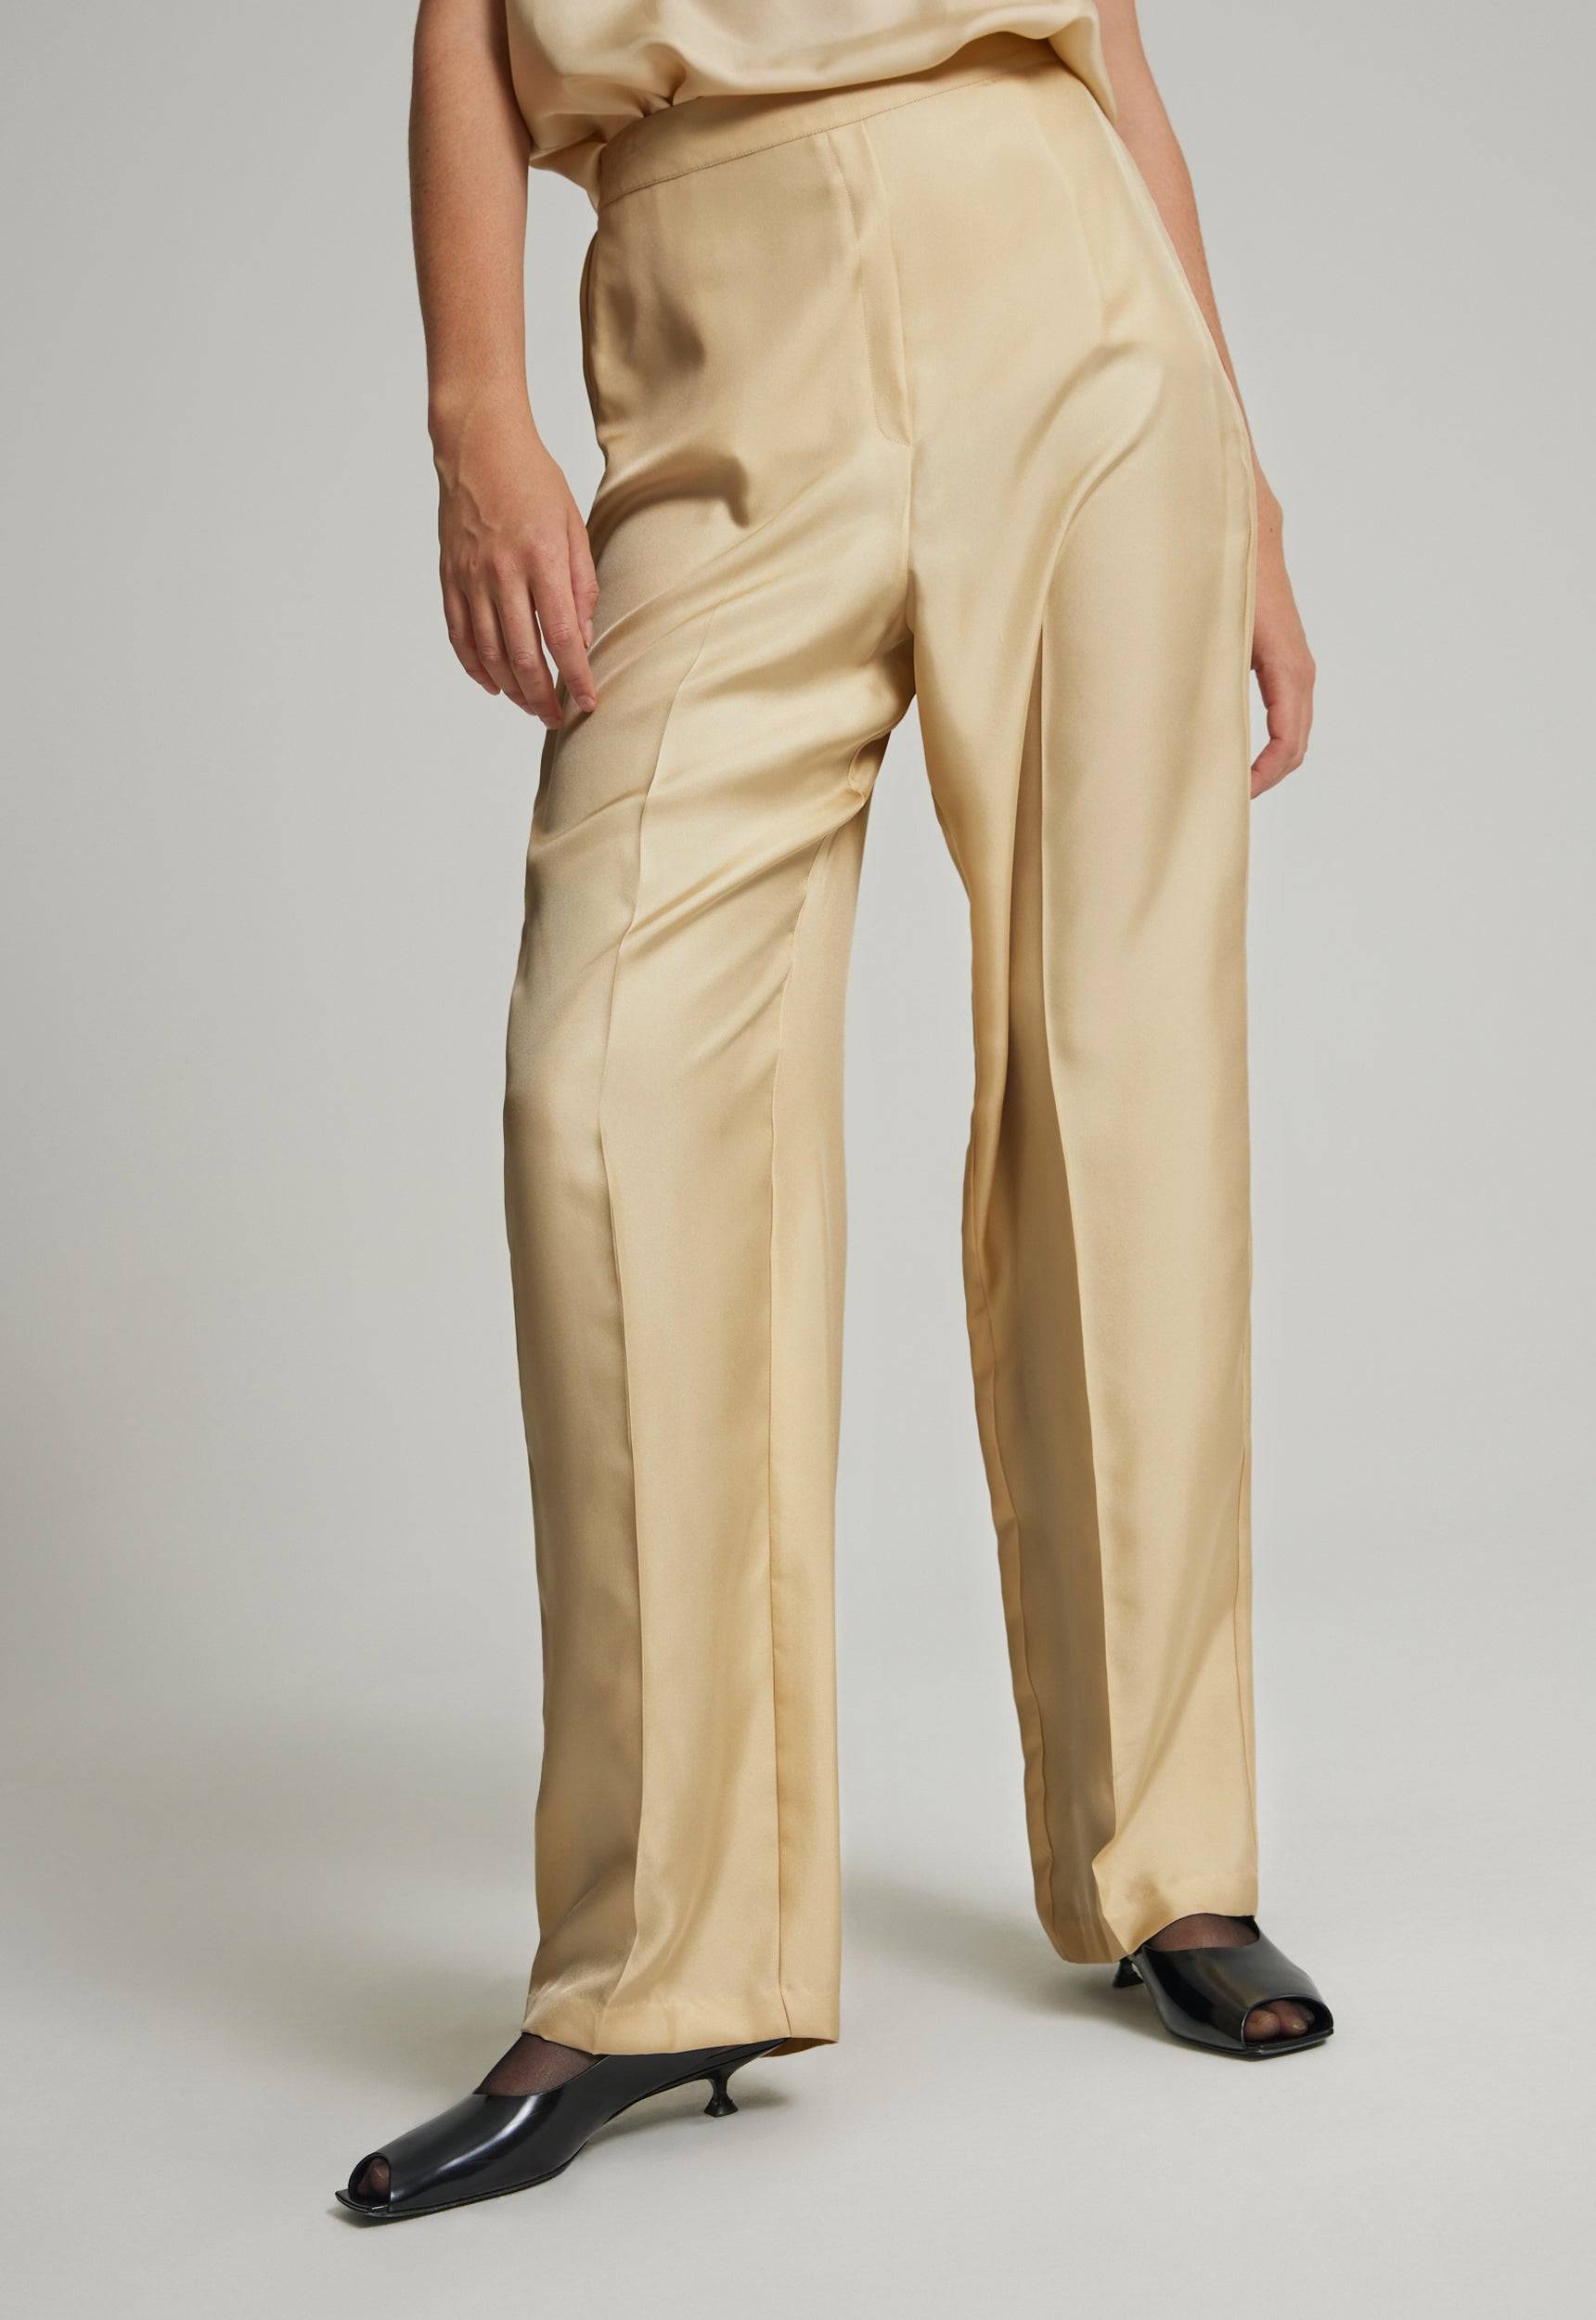 Jac+Jack SHAW SILK PANT in Camomile